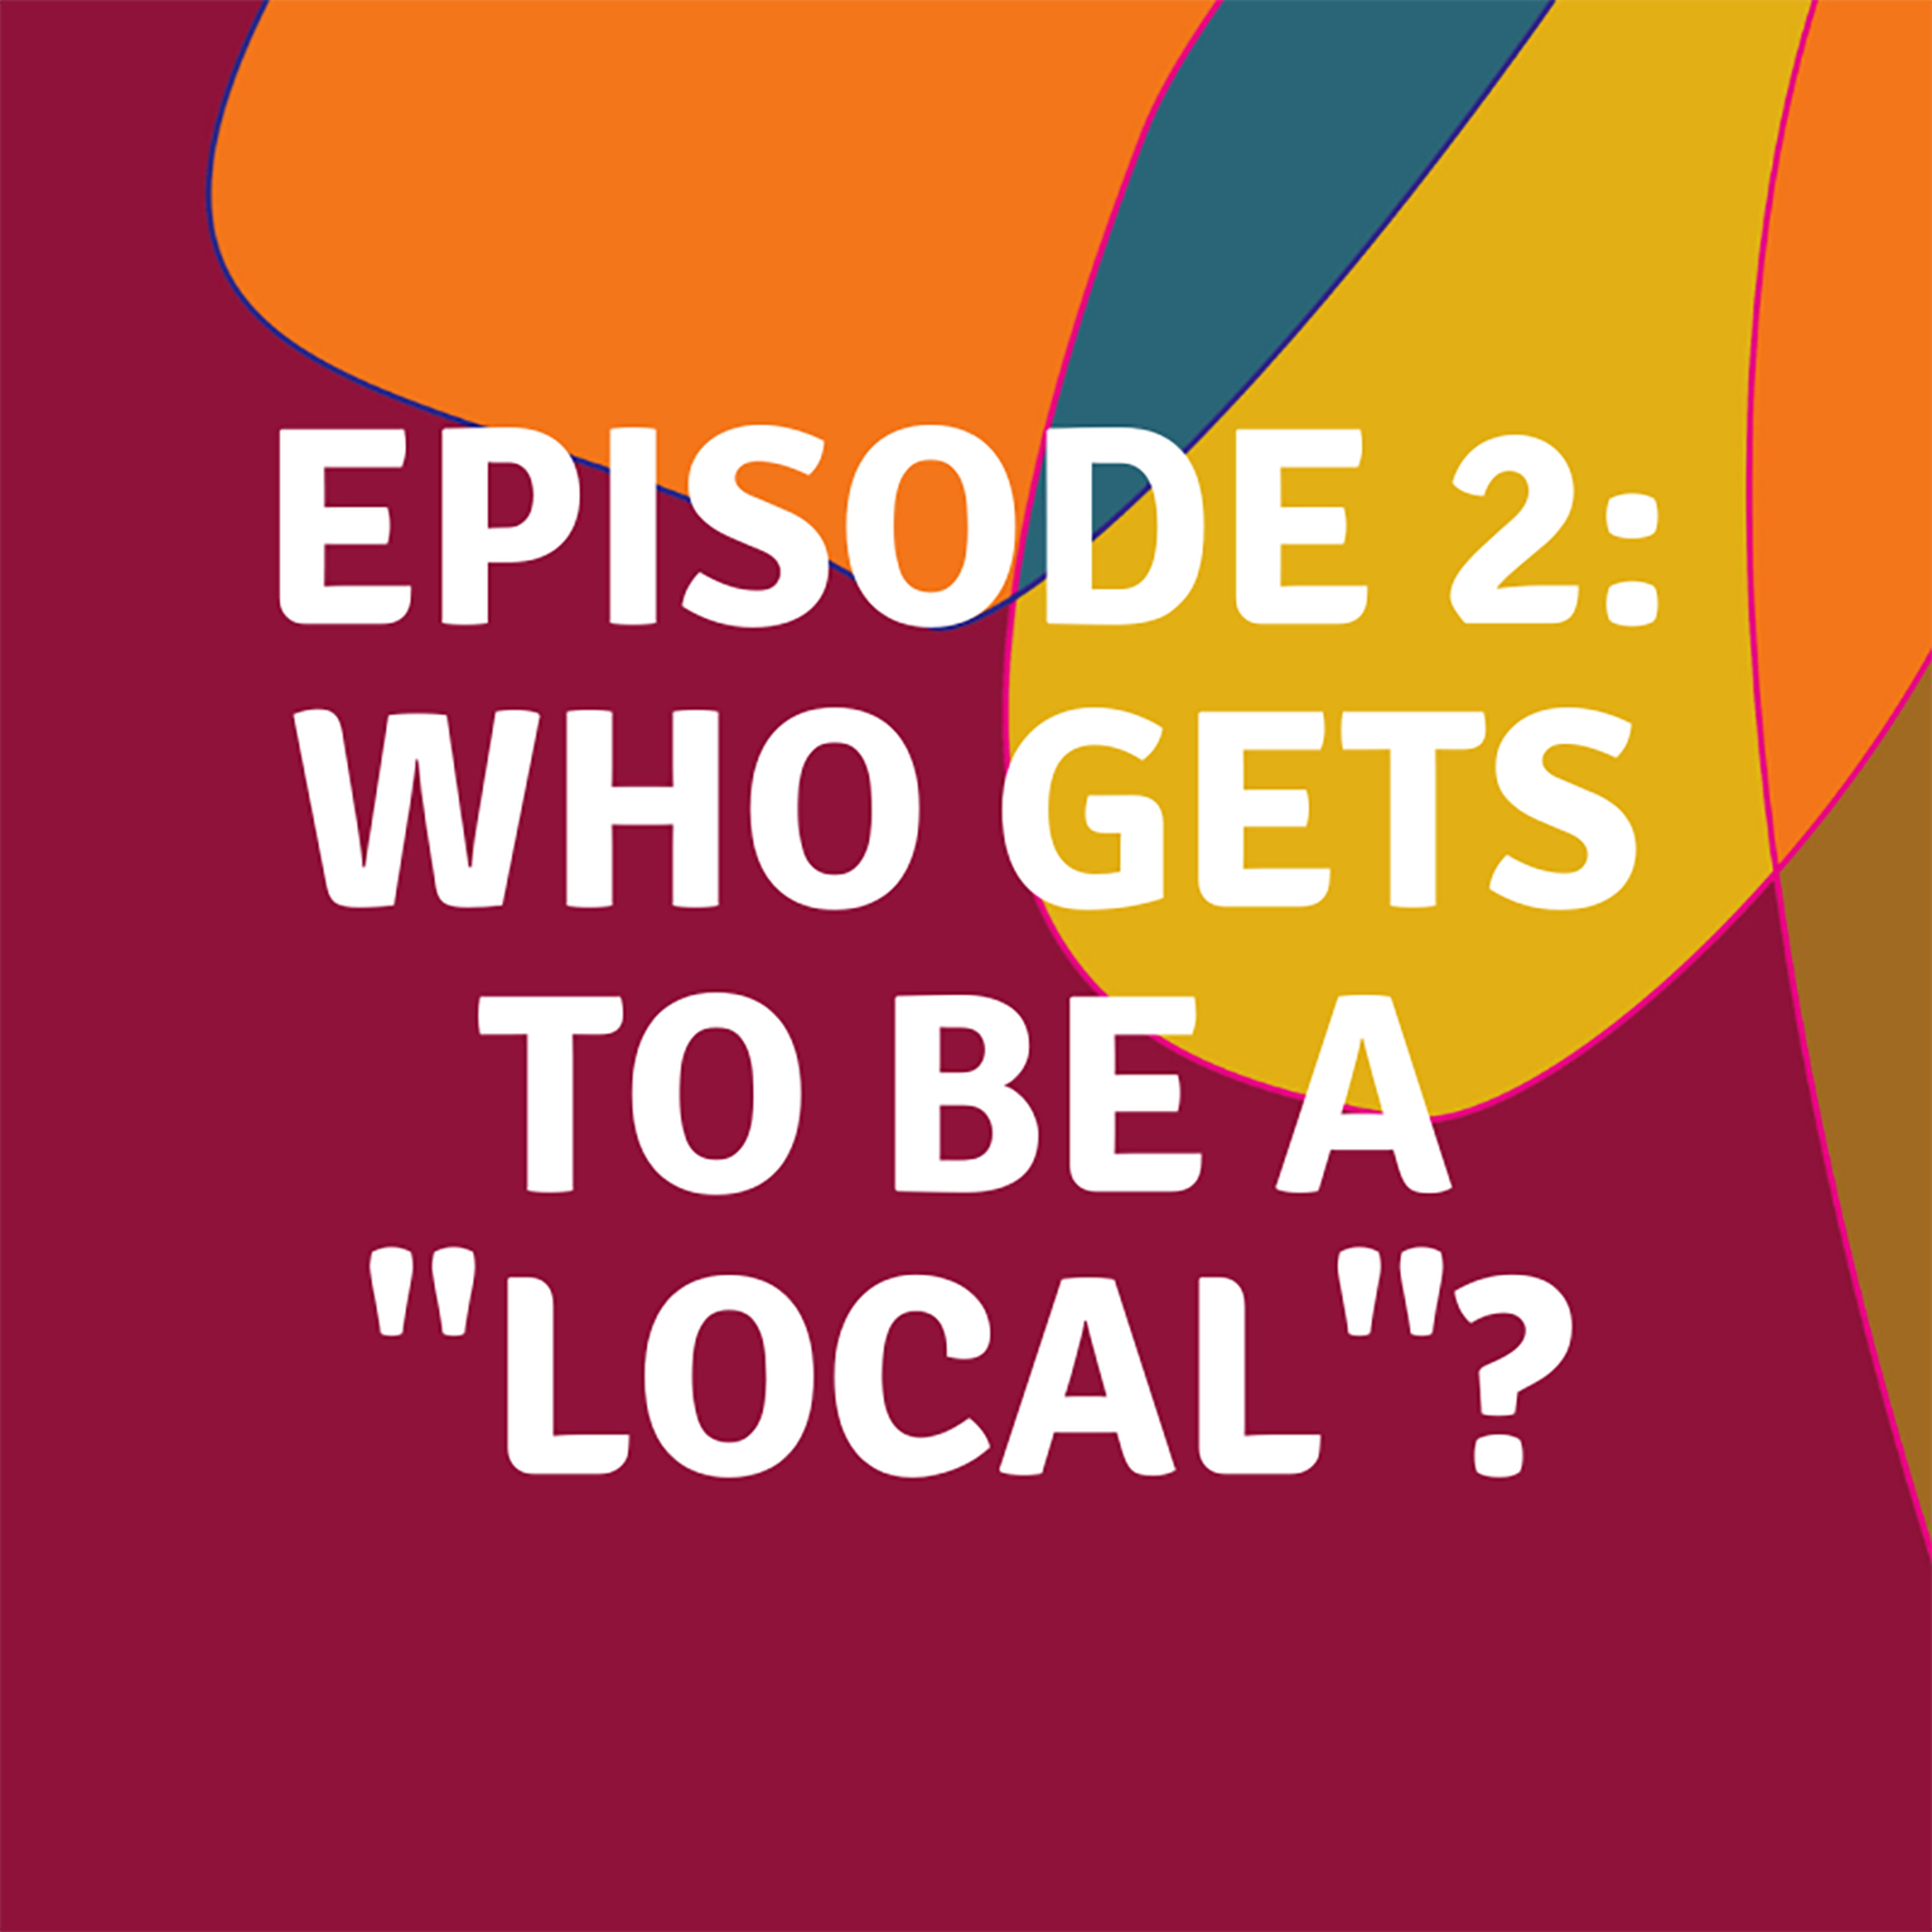 Who Gets to be a Local?